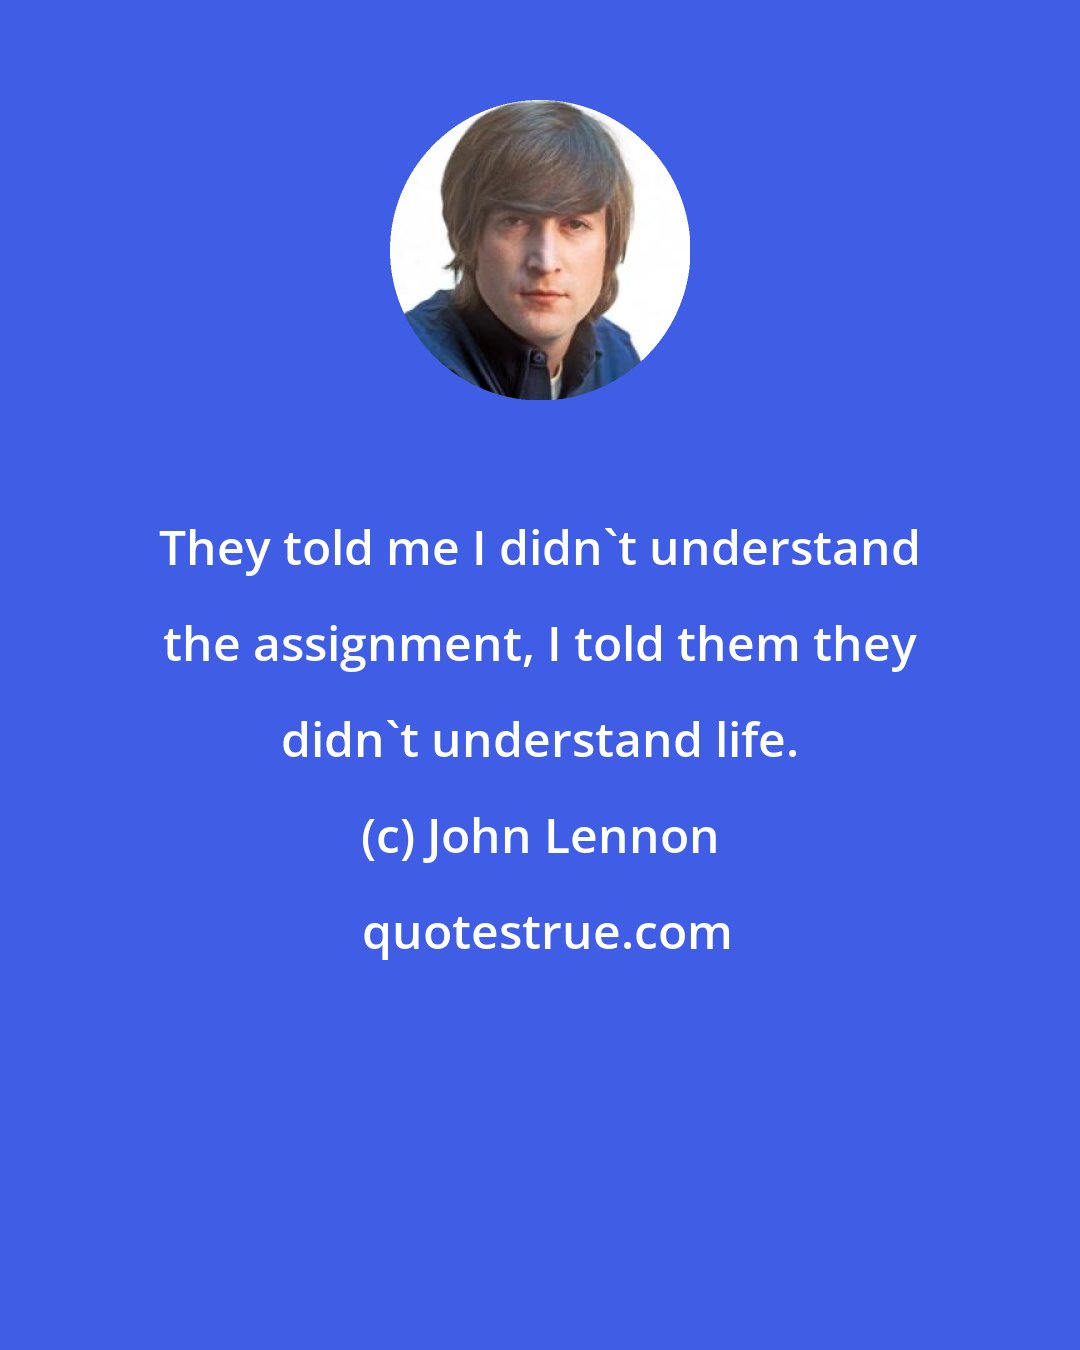 John Lennon: They told me I didn't understand the assignment, I told them they didn't understand life.